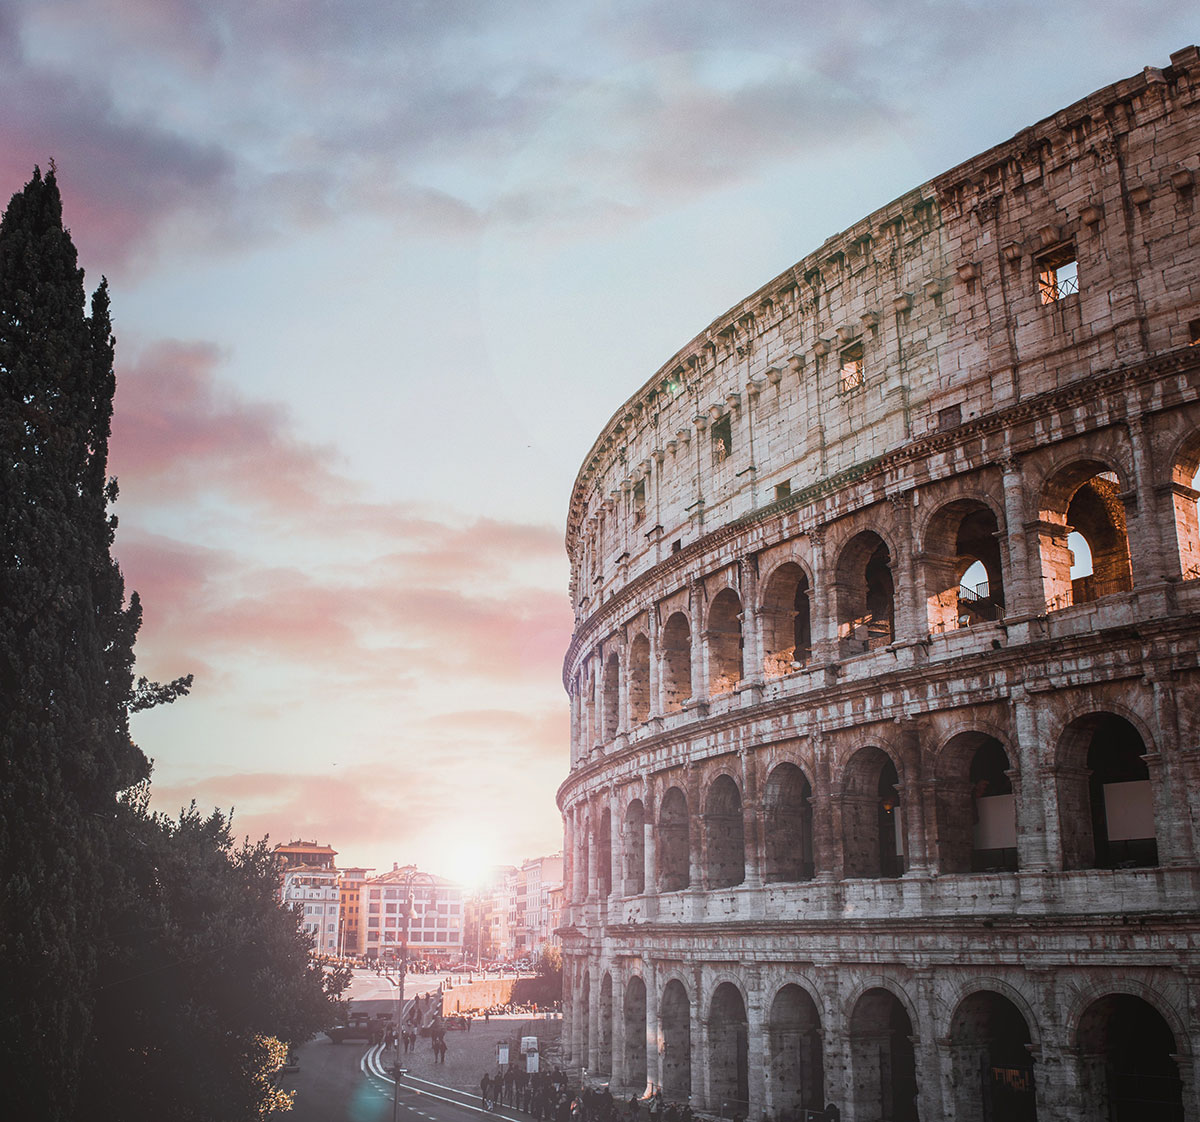 Sunrise over the Colosseum in Rome, Italy.